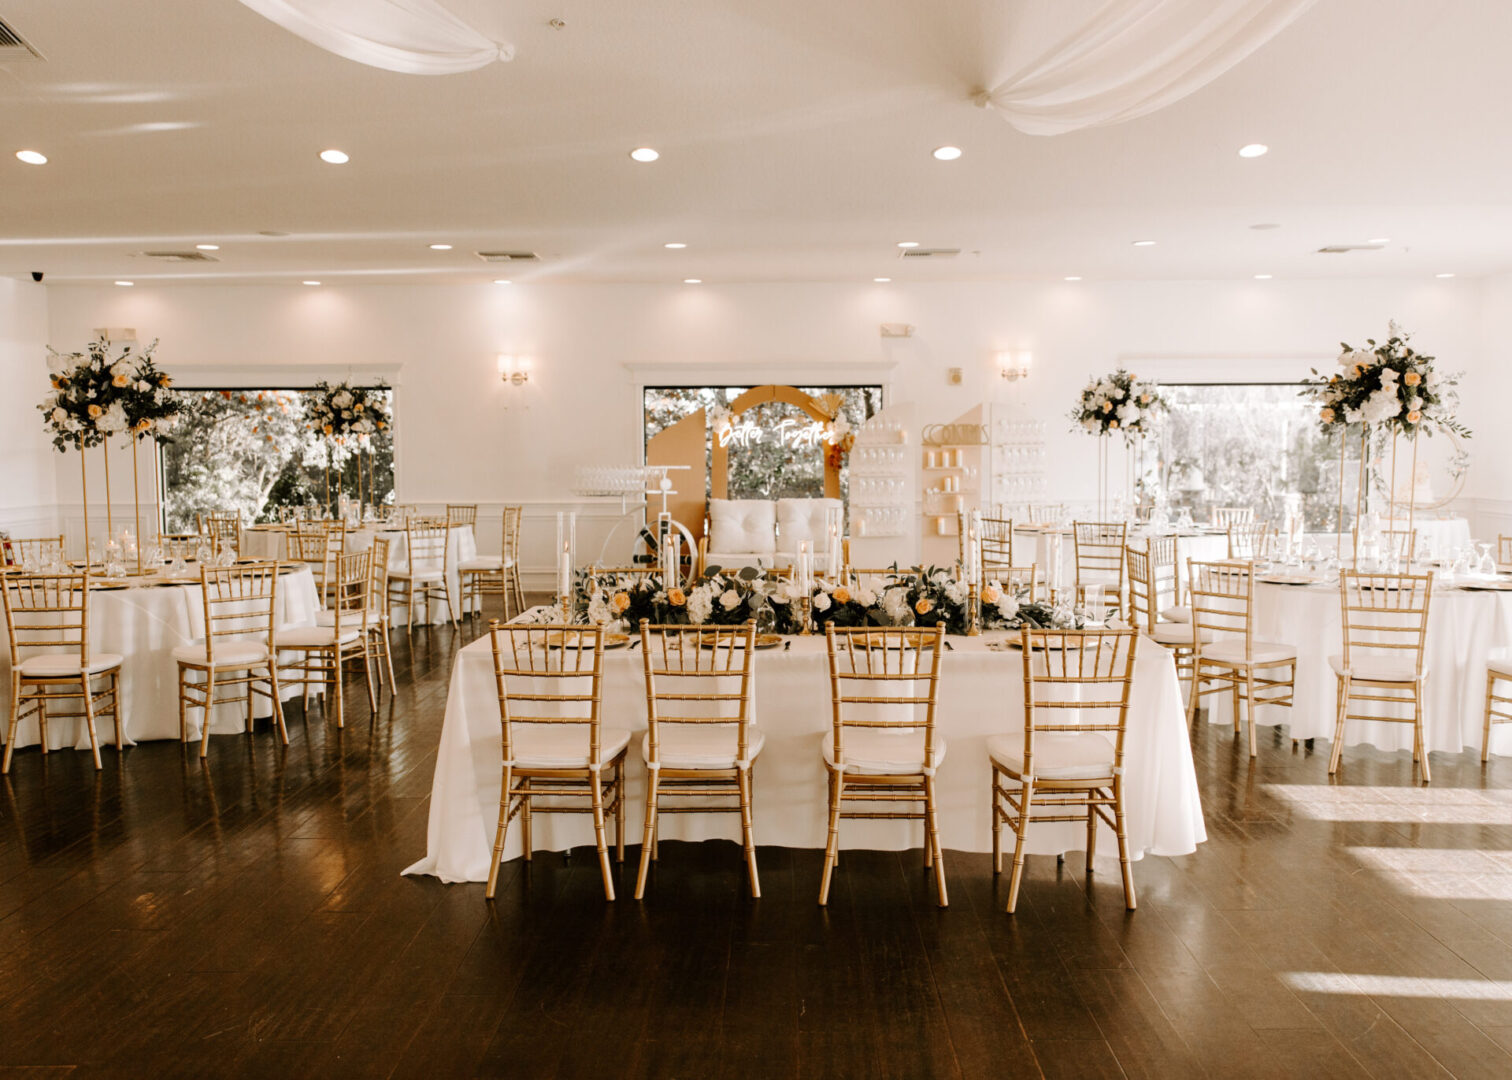 Tables With Brass Chairs in a Ceremony